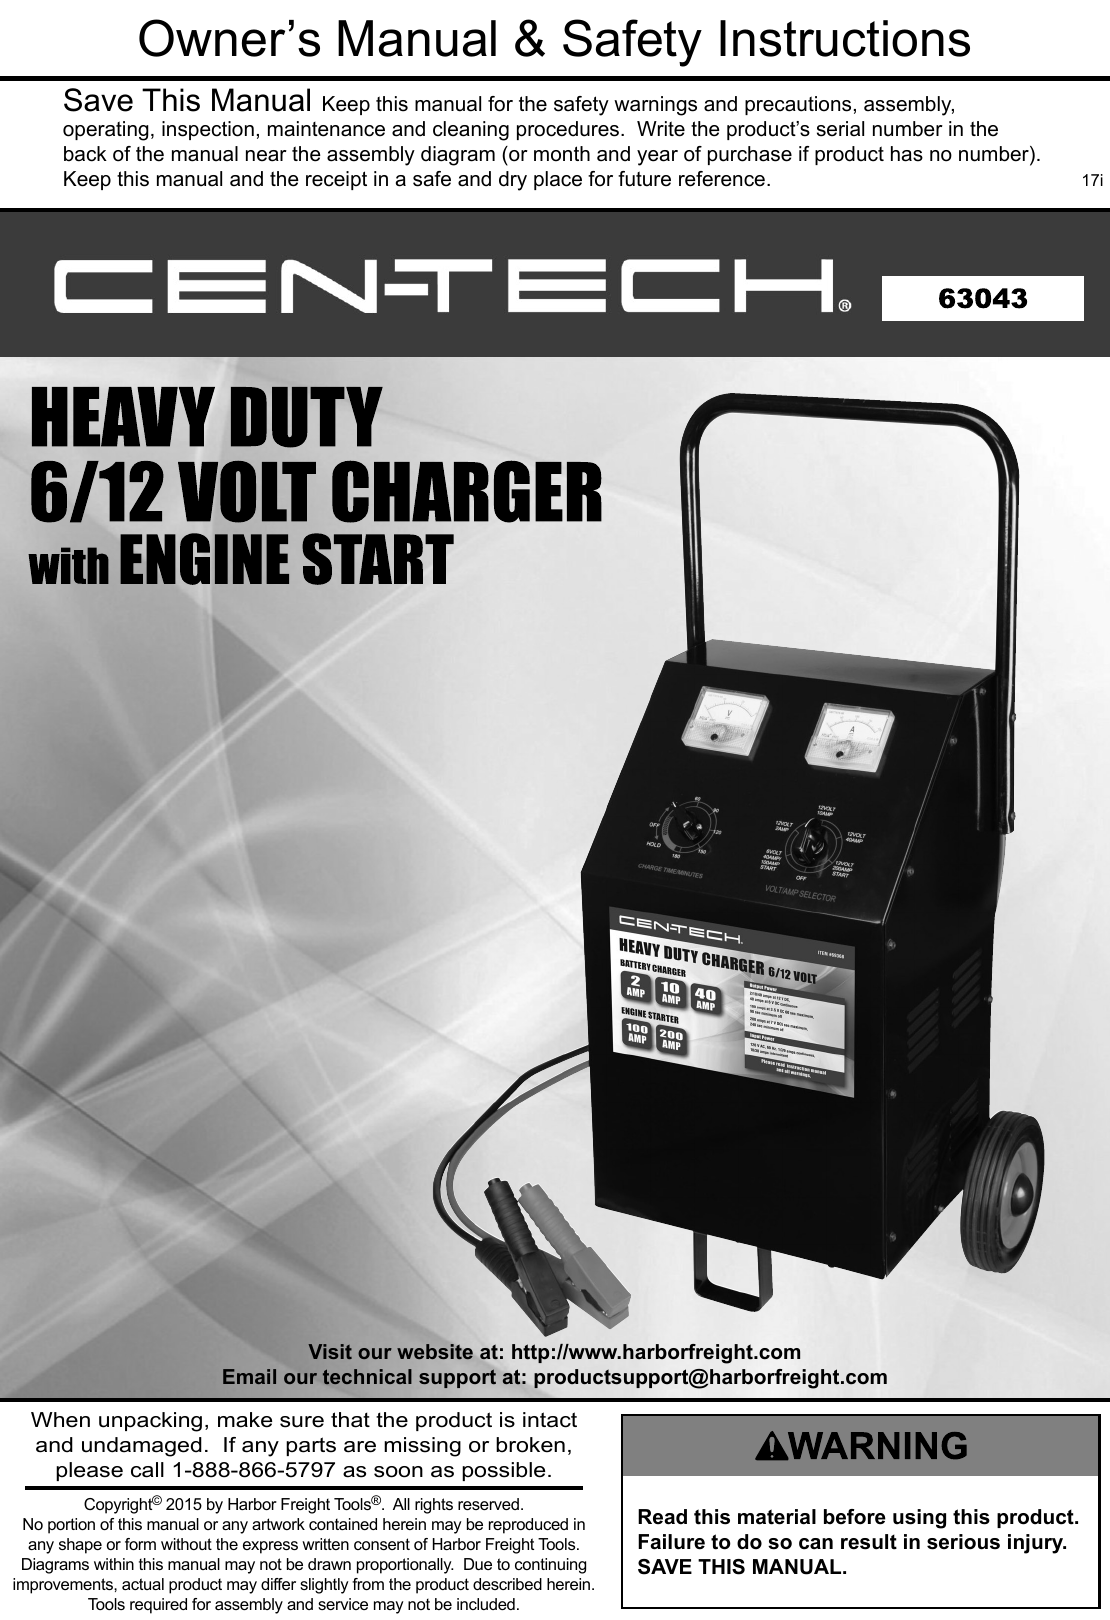 Manual For The 63043 2/40/200 Amp 6/12V Wheel Charger With Start